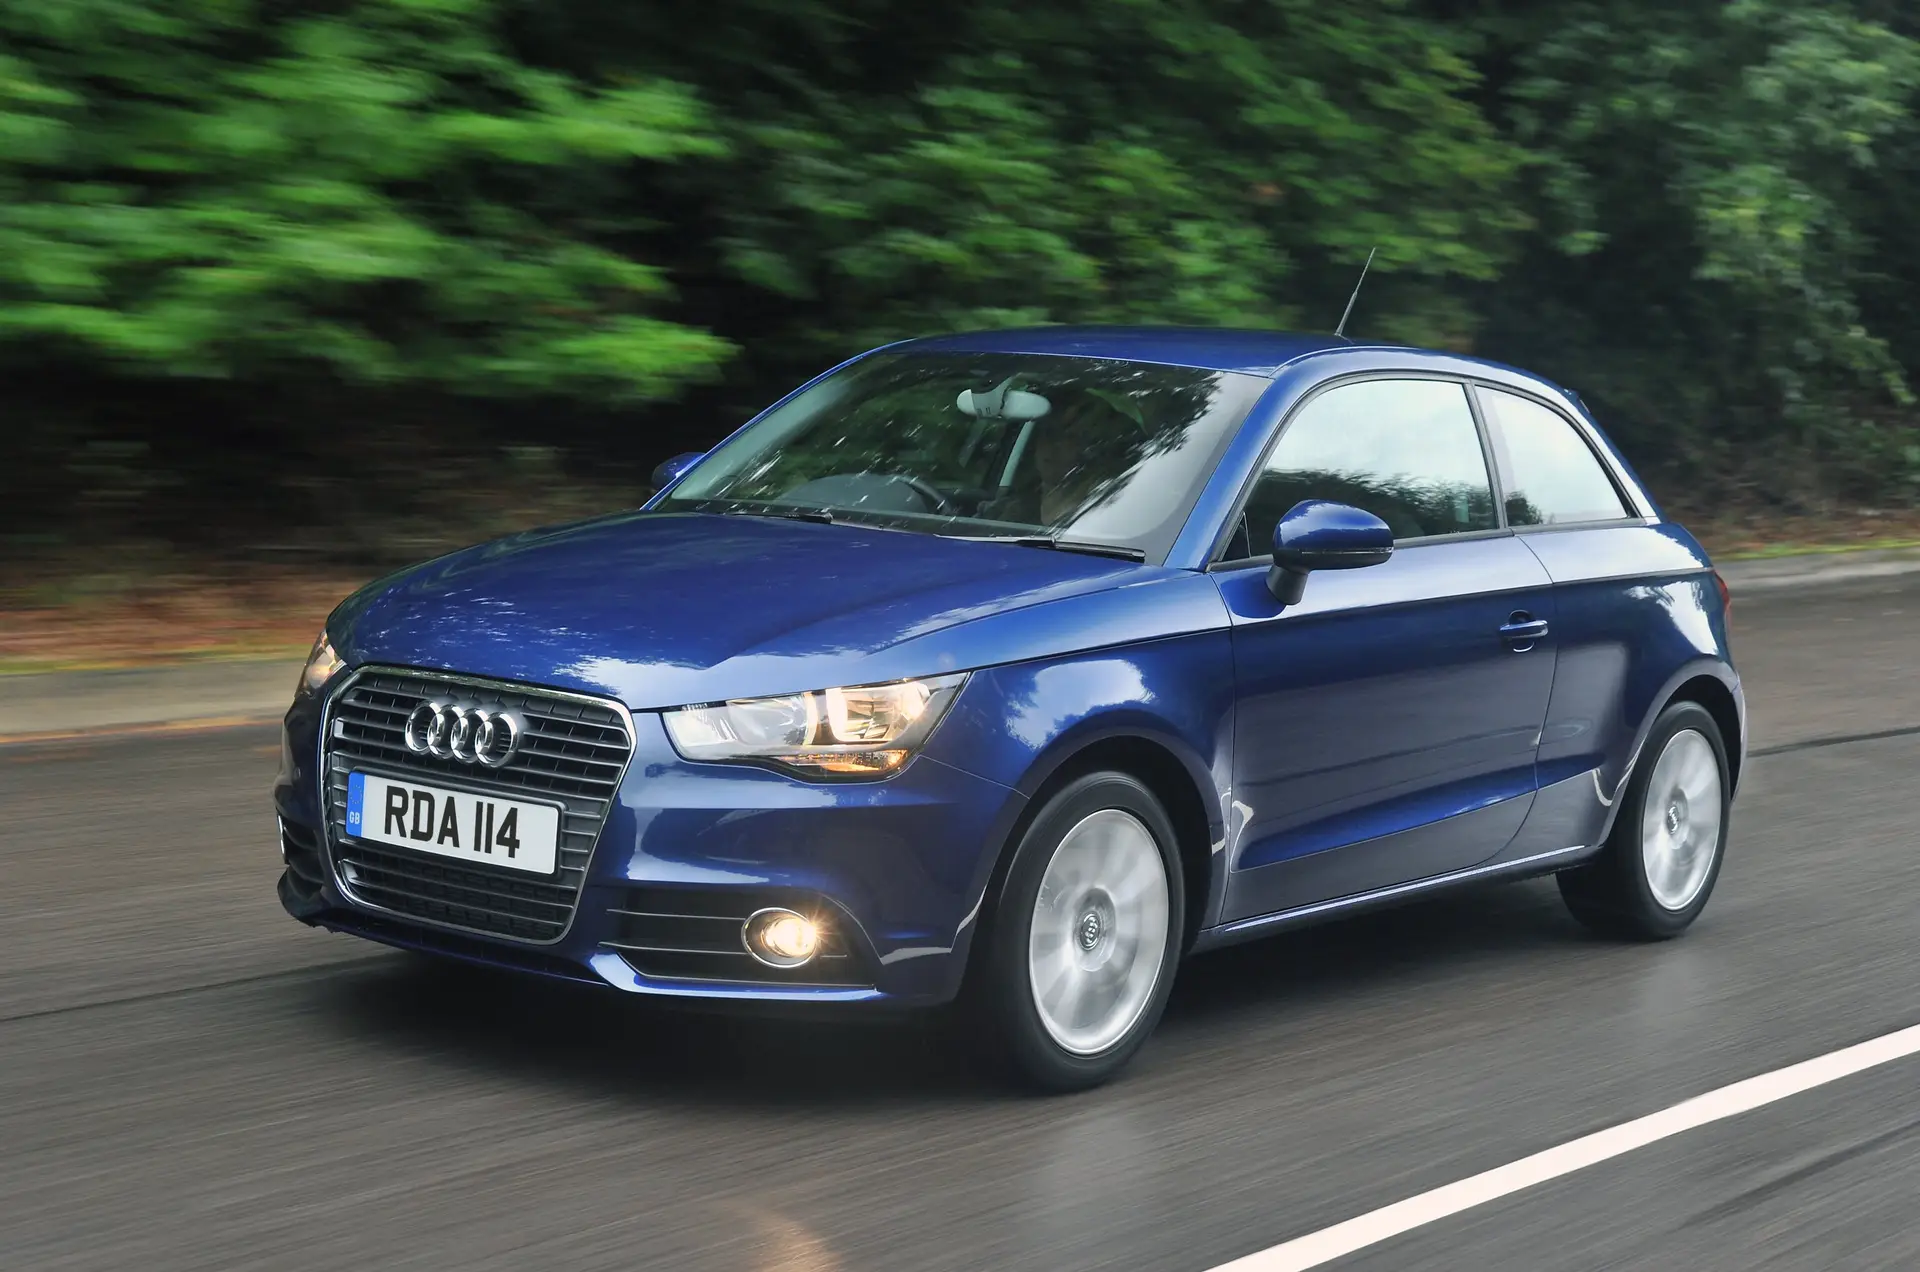 Audi A1 (2010-2015) Review: exterior front three quarter photo of the Audi A1 on the road